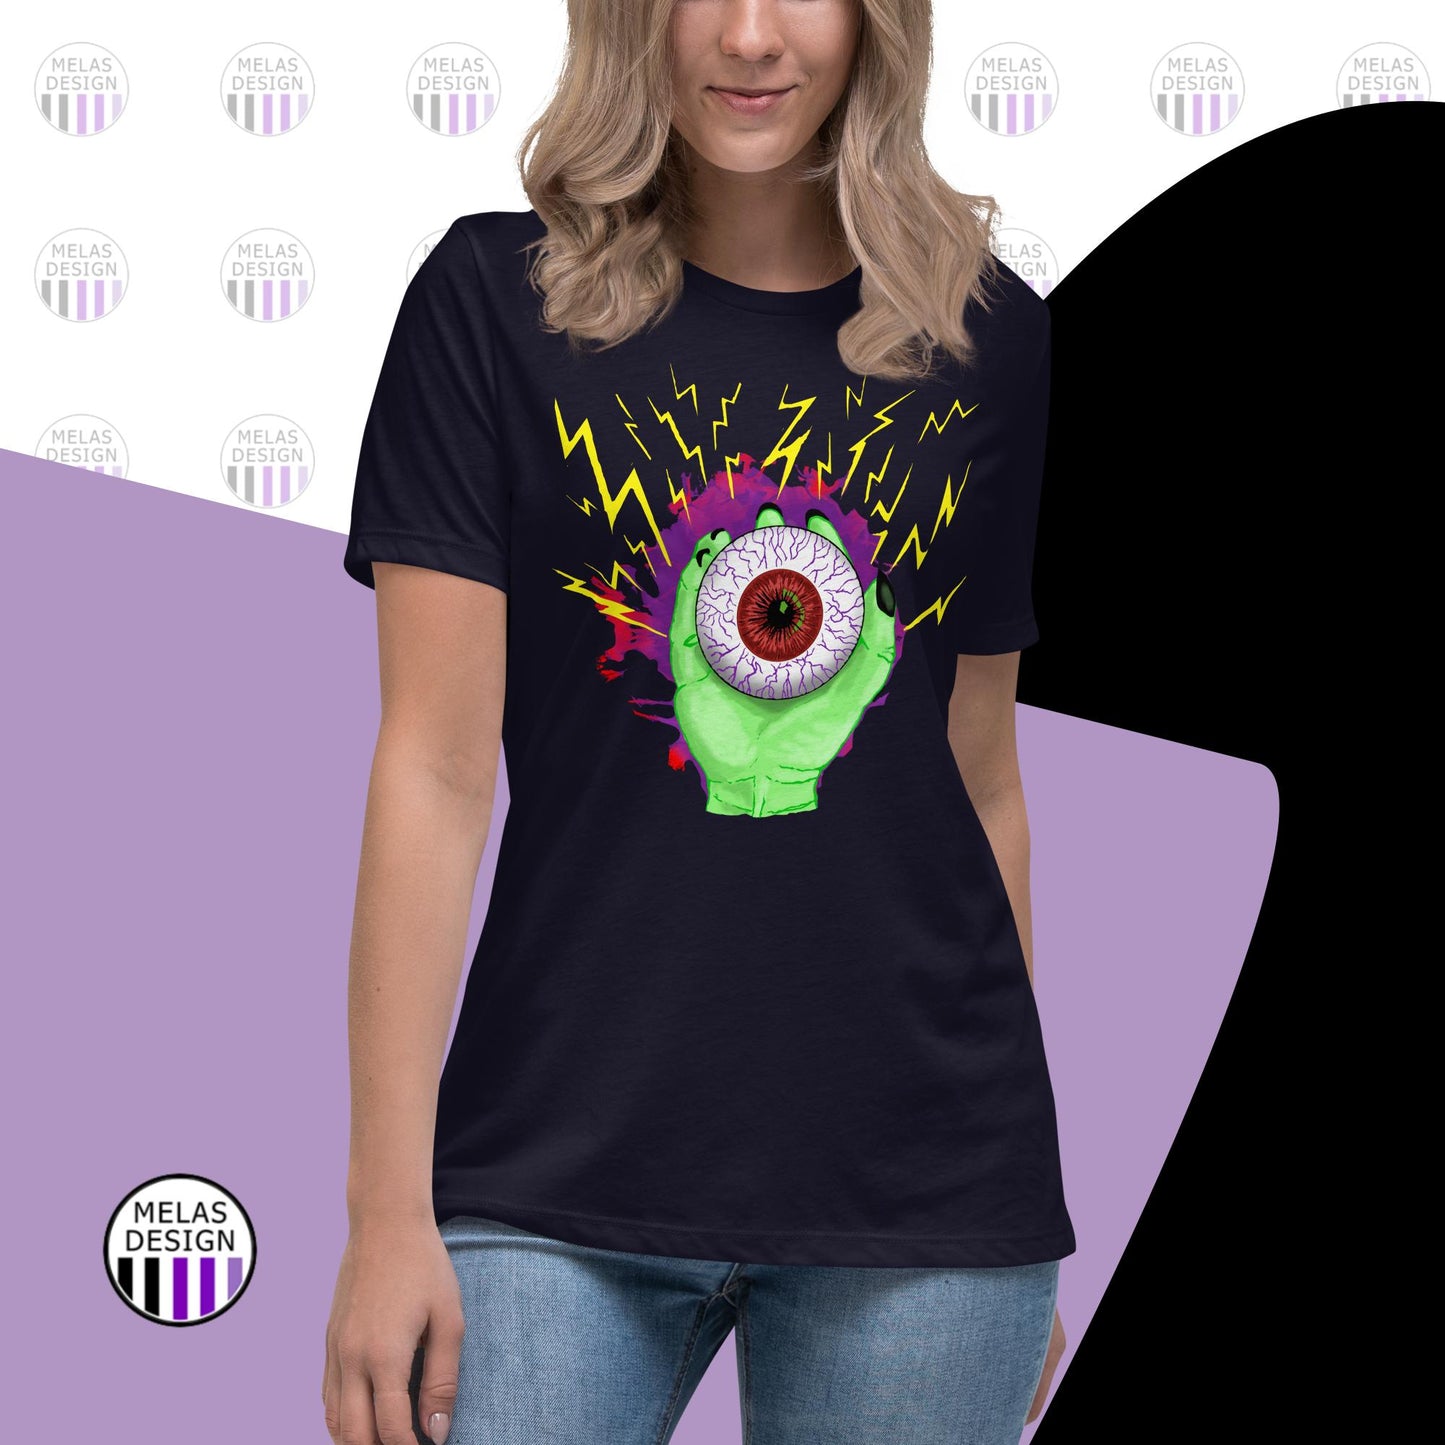 Electric Eye 23 Women's Relaxed T-Shirt; electric eye; gothic; horror; Halloween; womens t-shirt; S-3X; Melasdesign; witchy gothic clothes and cryptid fashion collection; horror; eye hand sparks